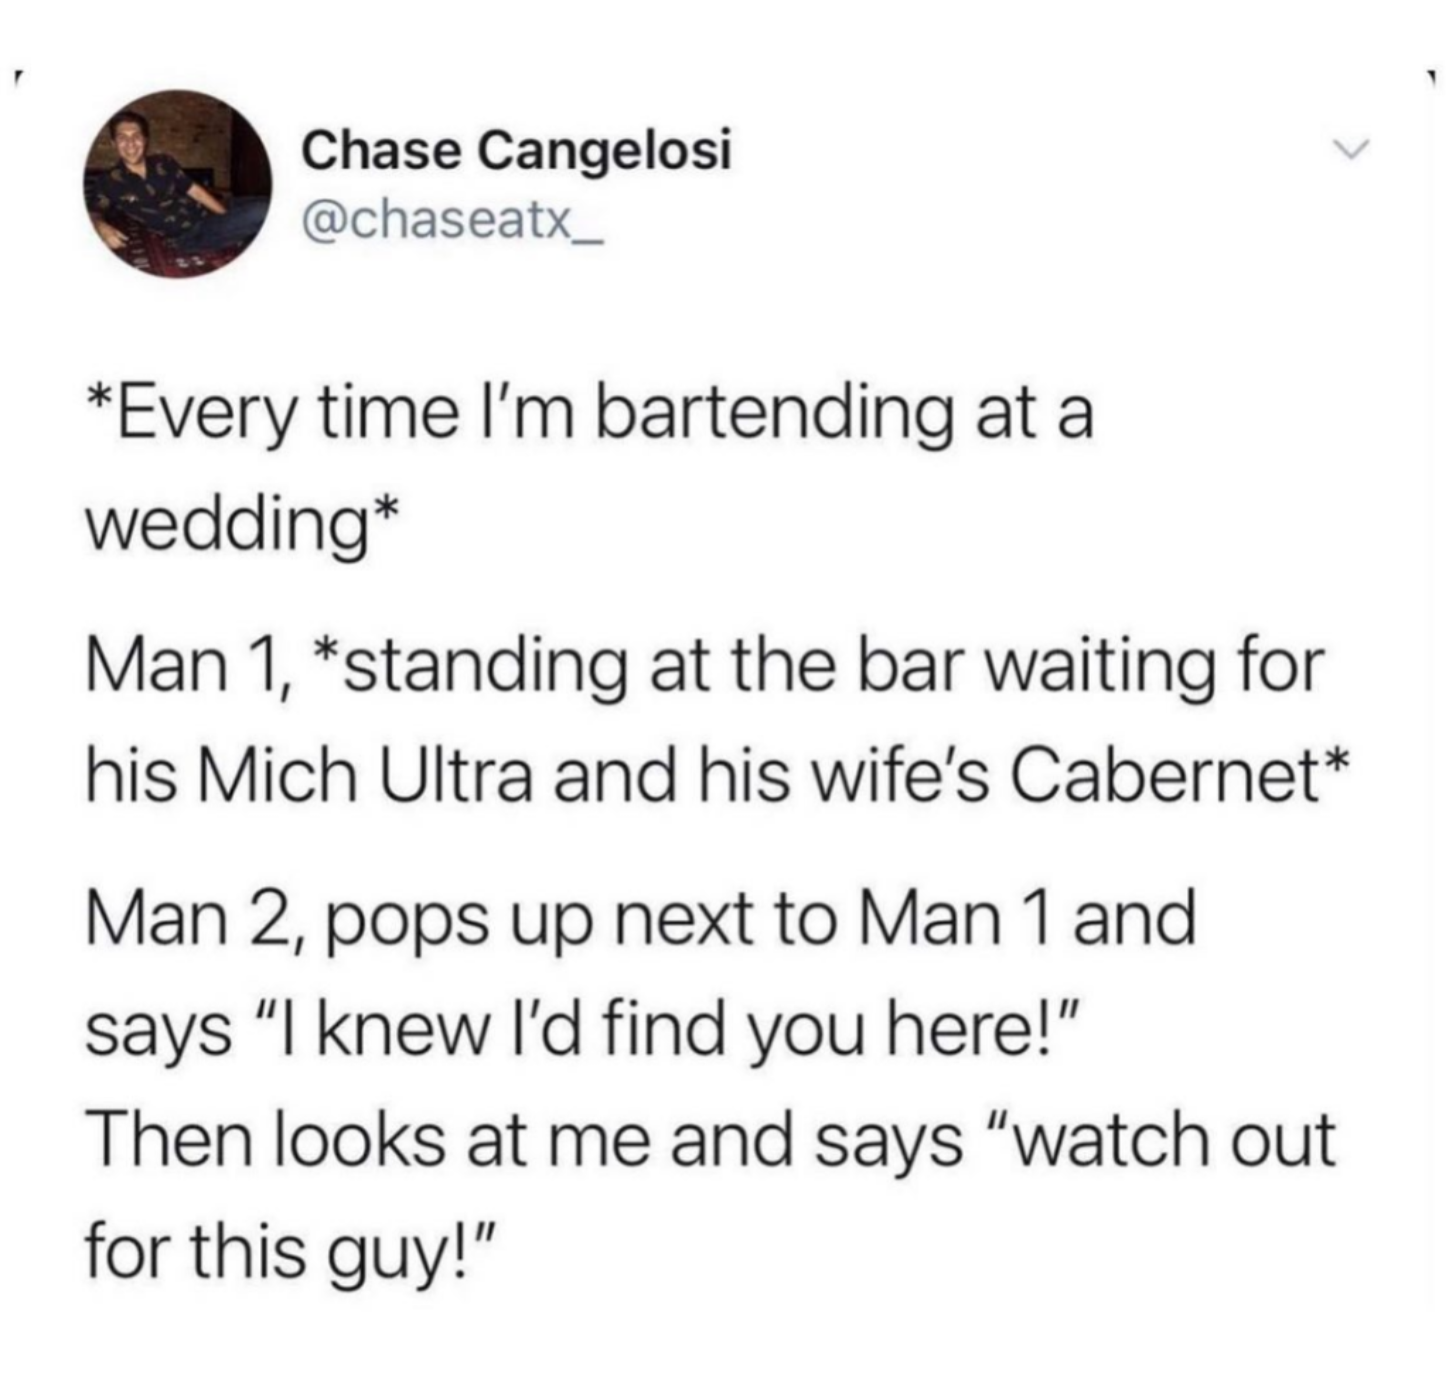 awesome random pics - you know become people you - Chase Cangelosi Every time I'm bartending at a wedding Man 1, standing at the bar waiting for his Mich Ultra and his wife's Cabernet Man 2, pops up next to Man 1 and says "I knew I'd find you here!" Then 